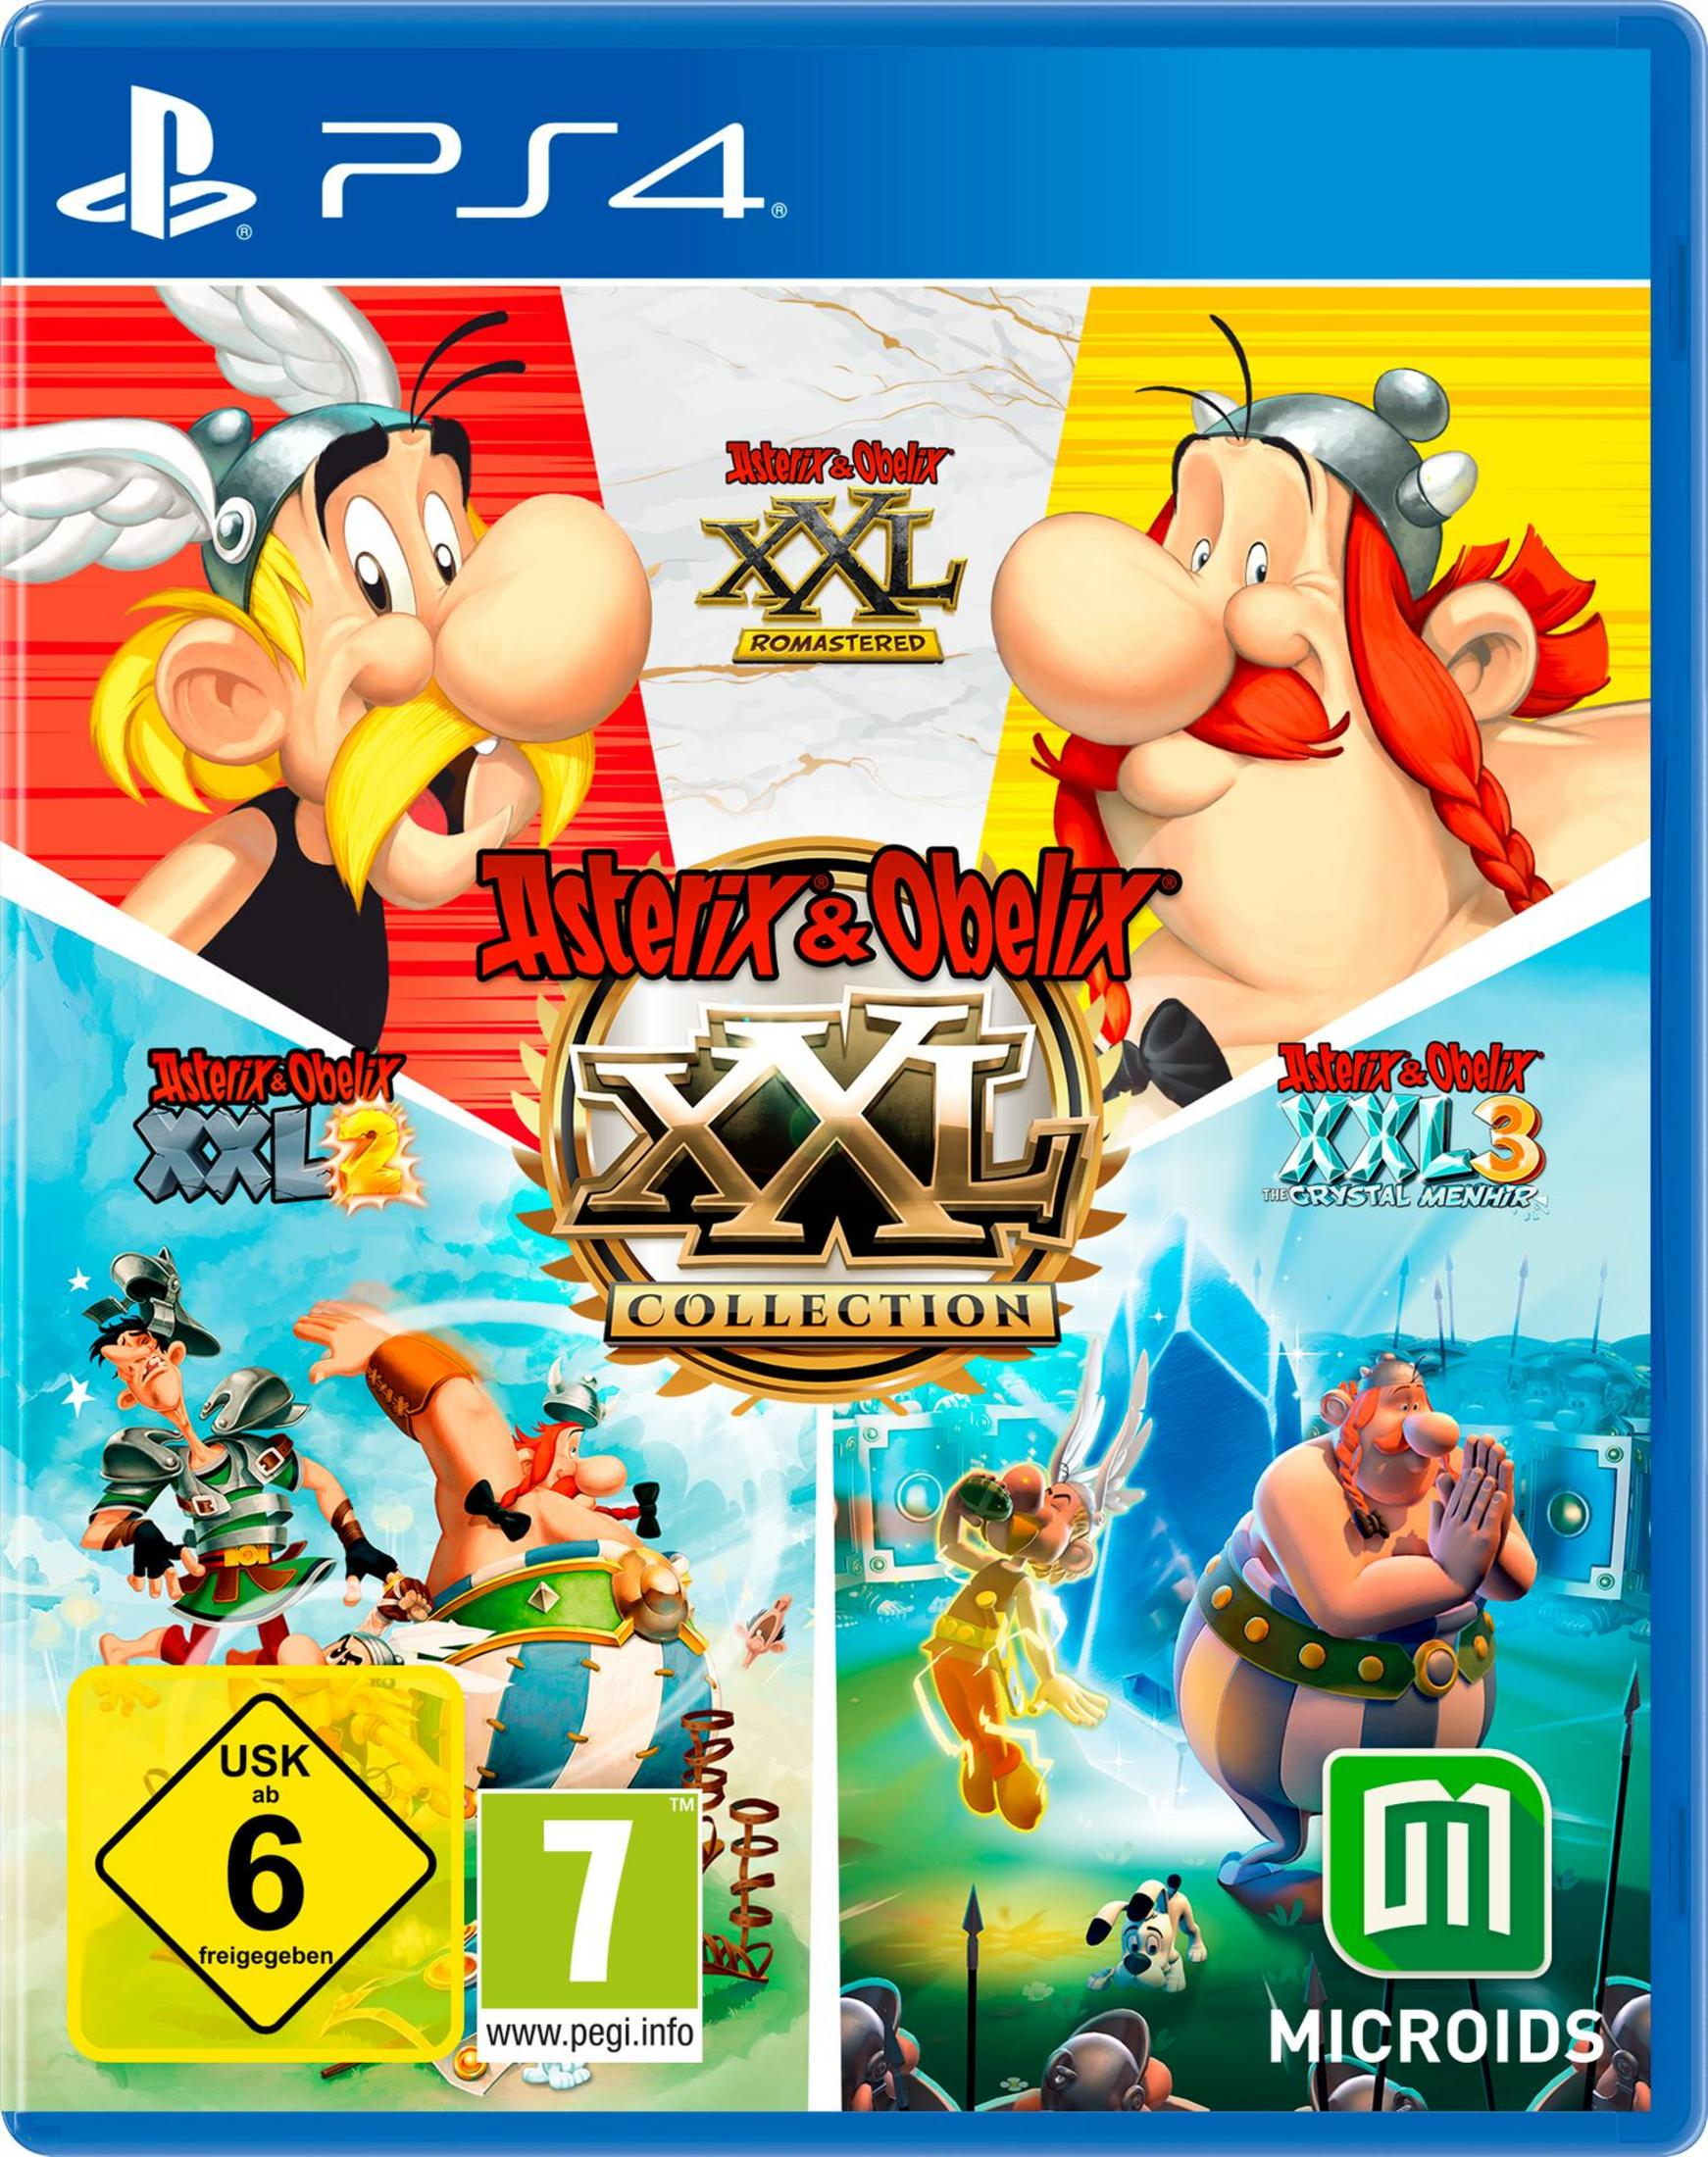 Asterix & Obelix XXL 4] - Collection PS-4 [PlayStation